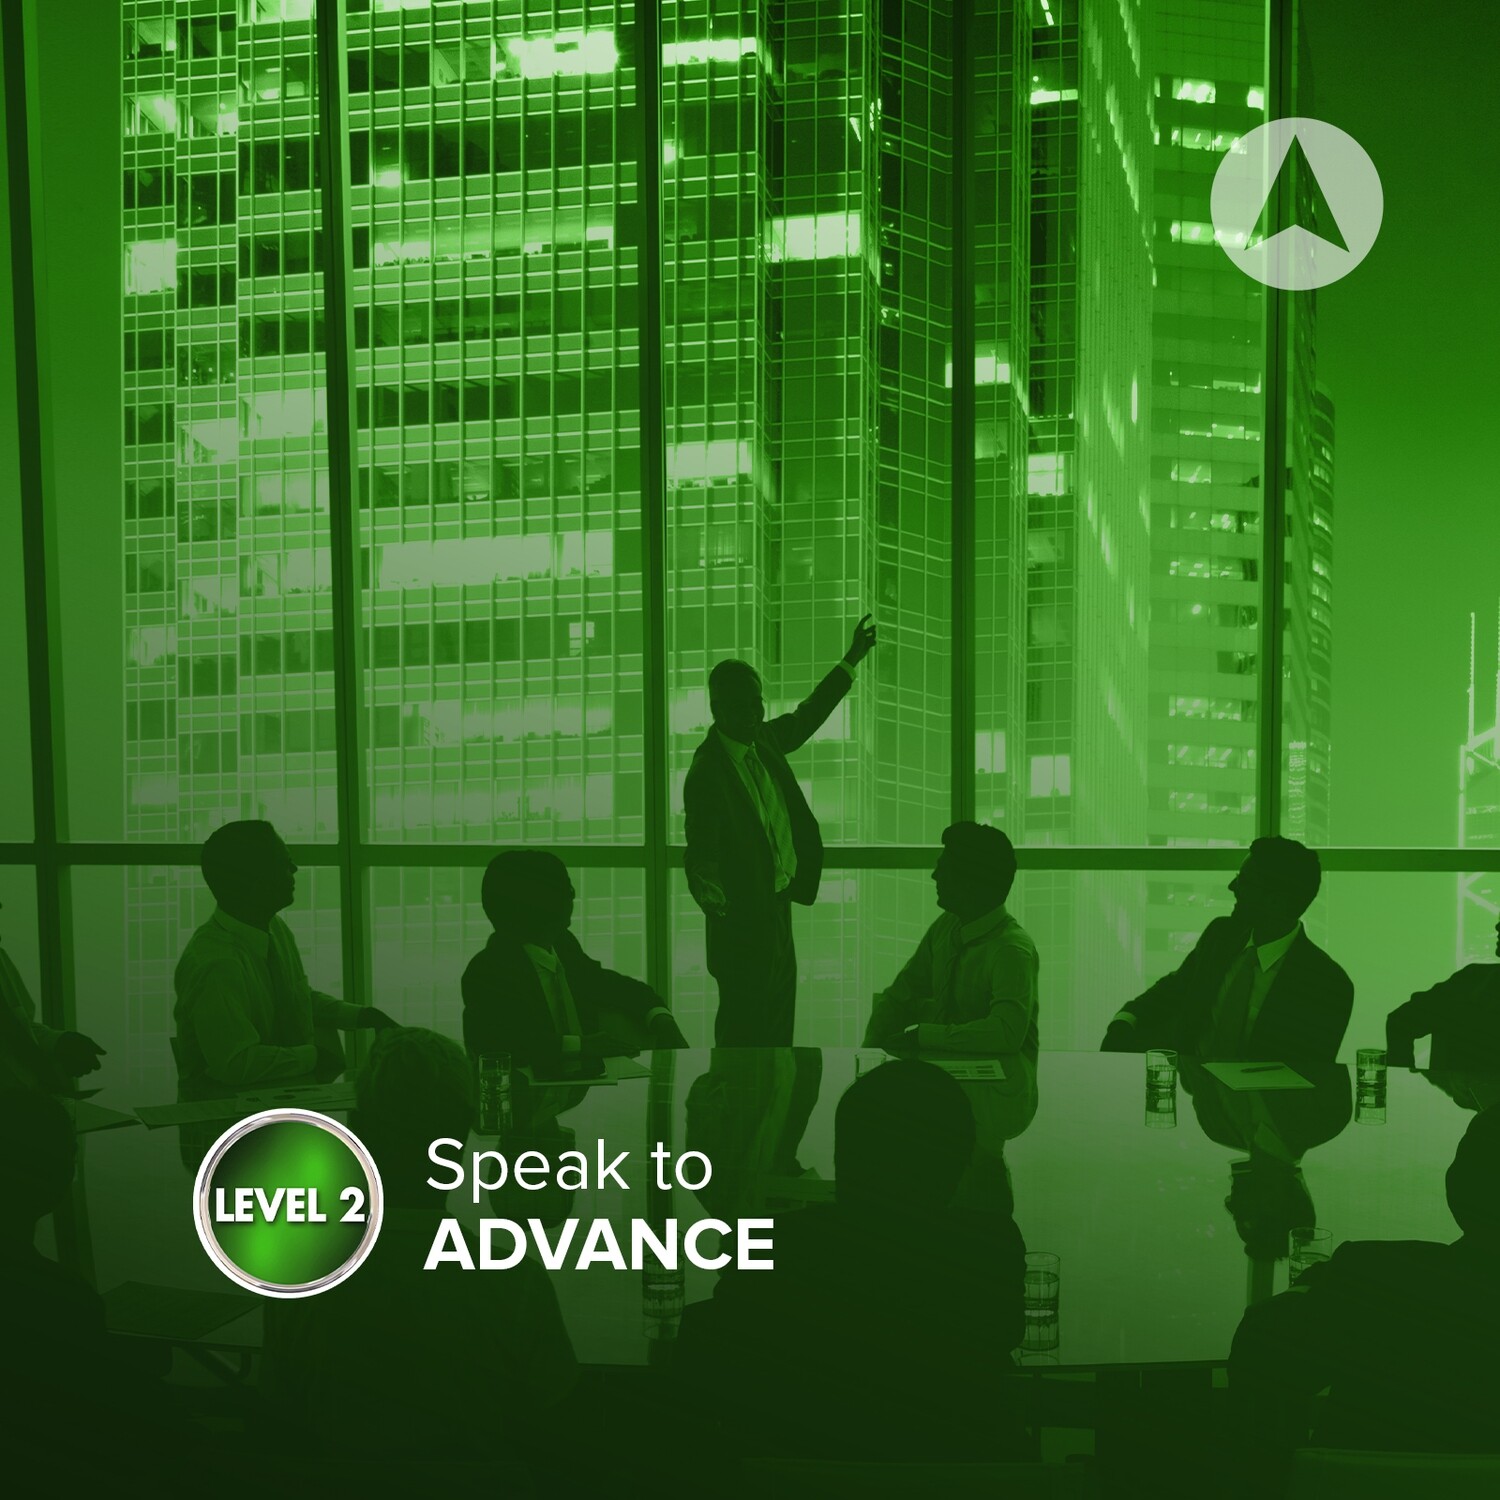 SPEAK TO ADVANCE - Advance your career in 90 days